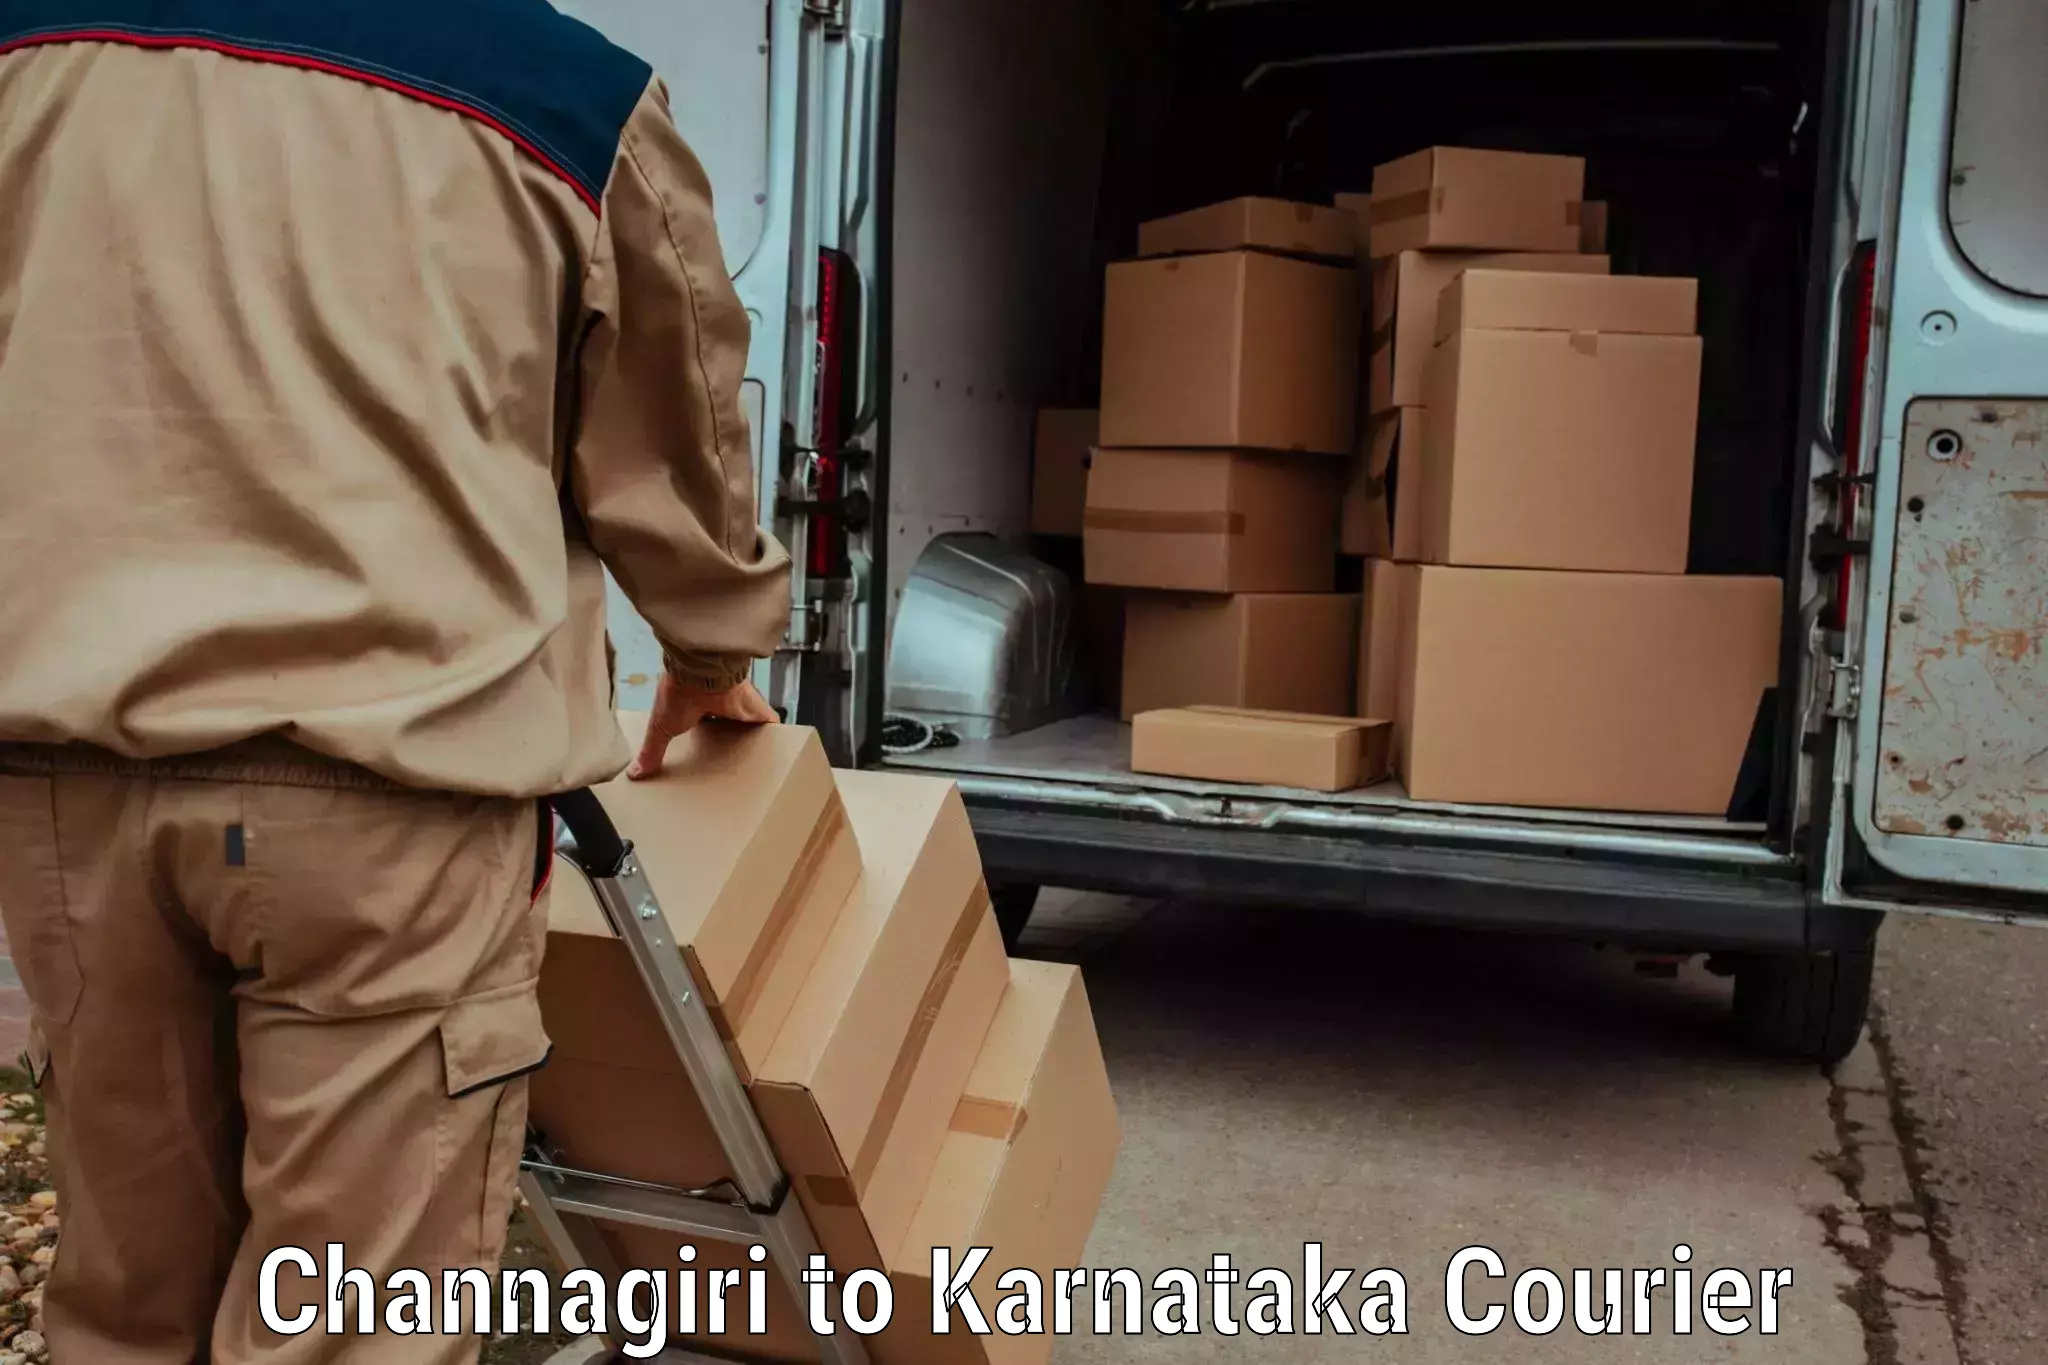 On-call courier service Channagiri to Puttur